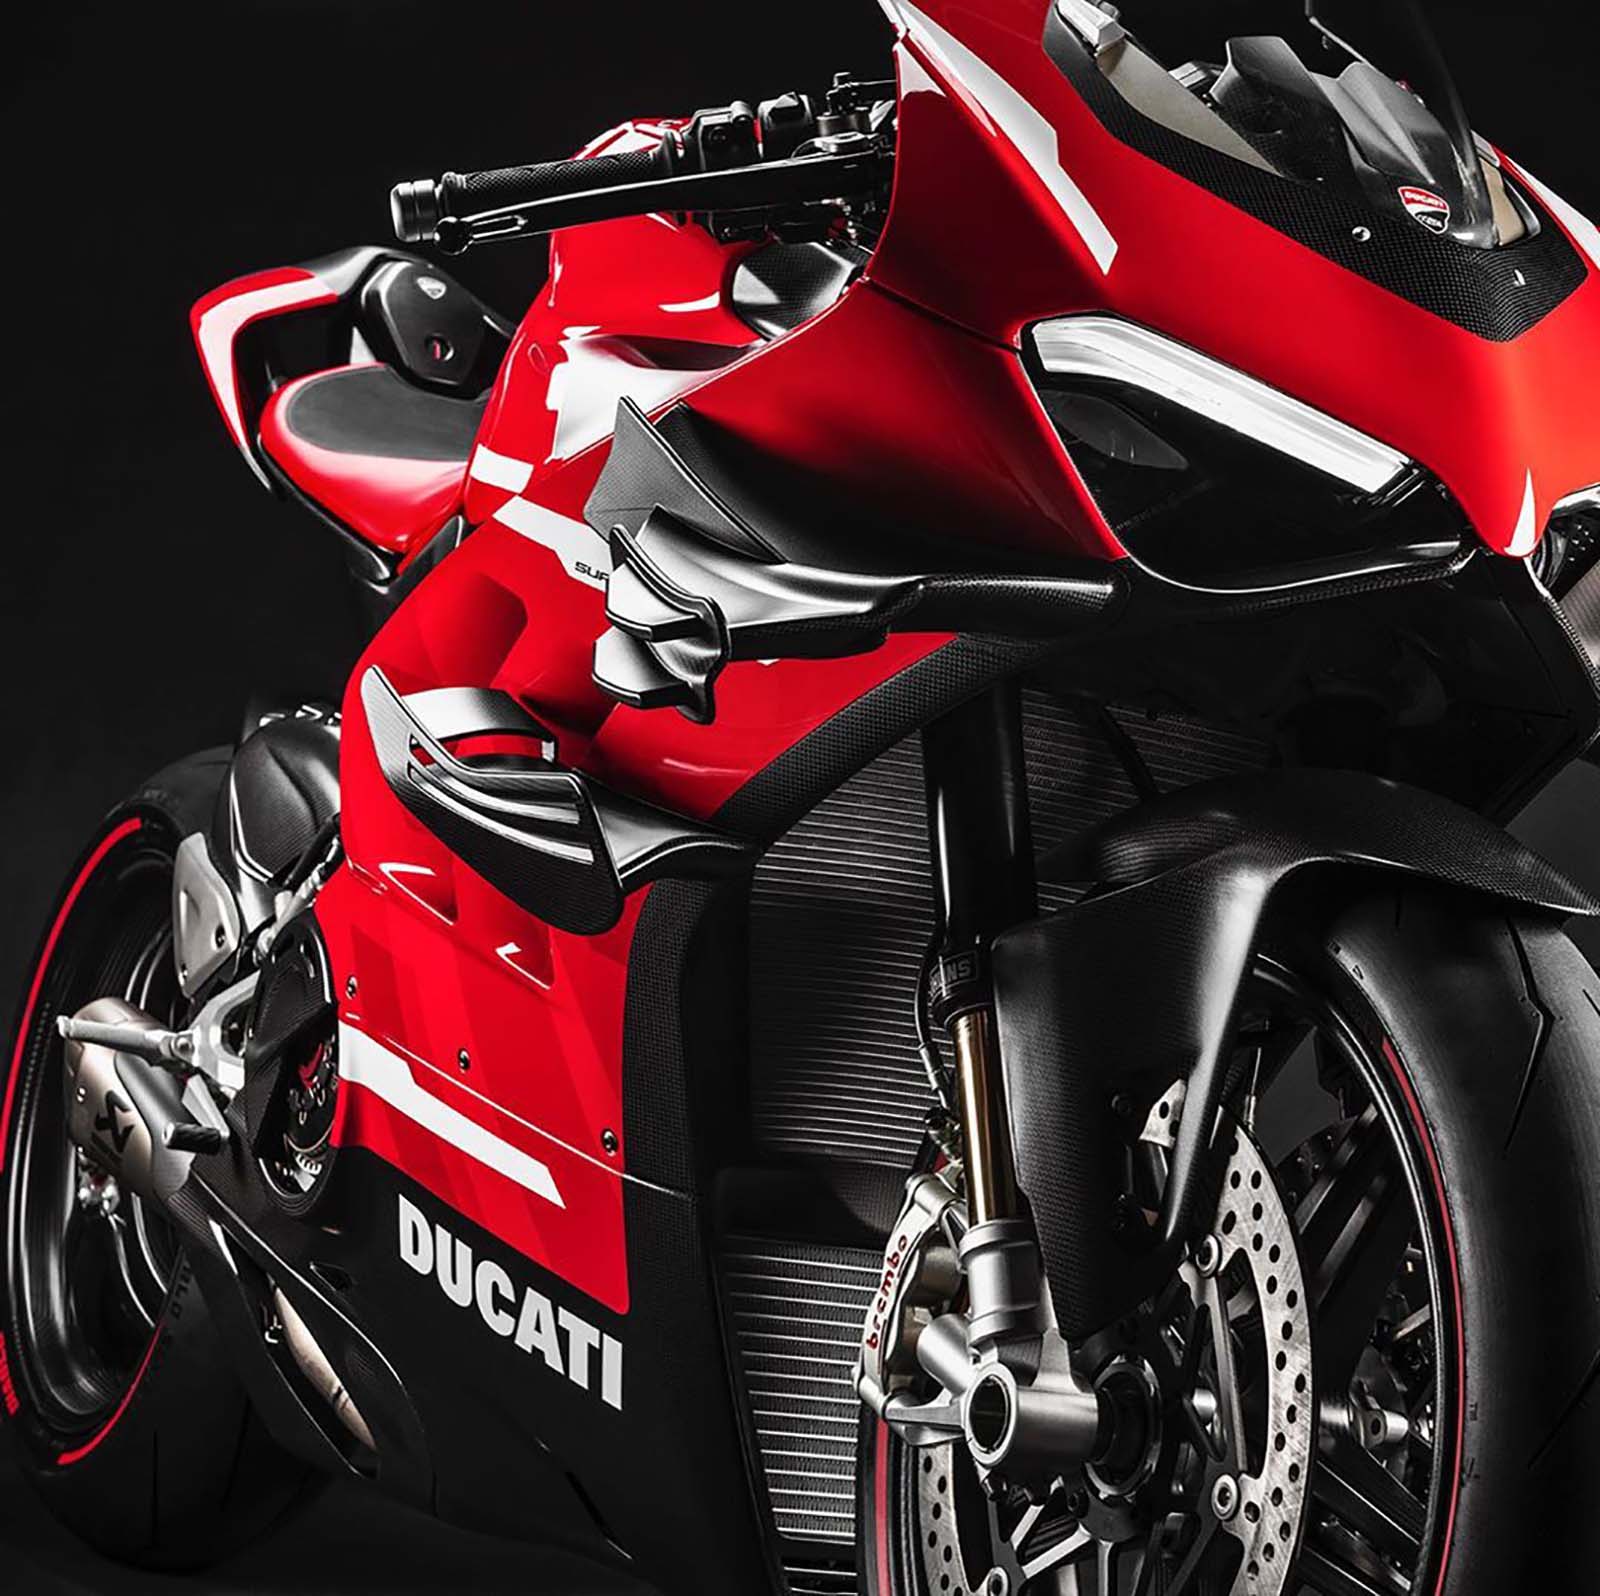 2020 Ducati Superleggera V4 Here Are The First Photos Drivemag Riders